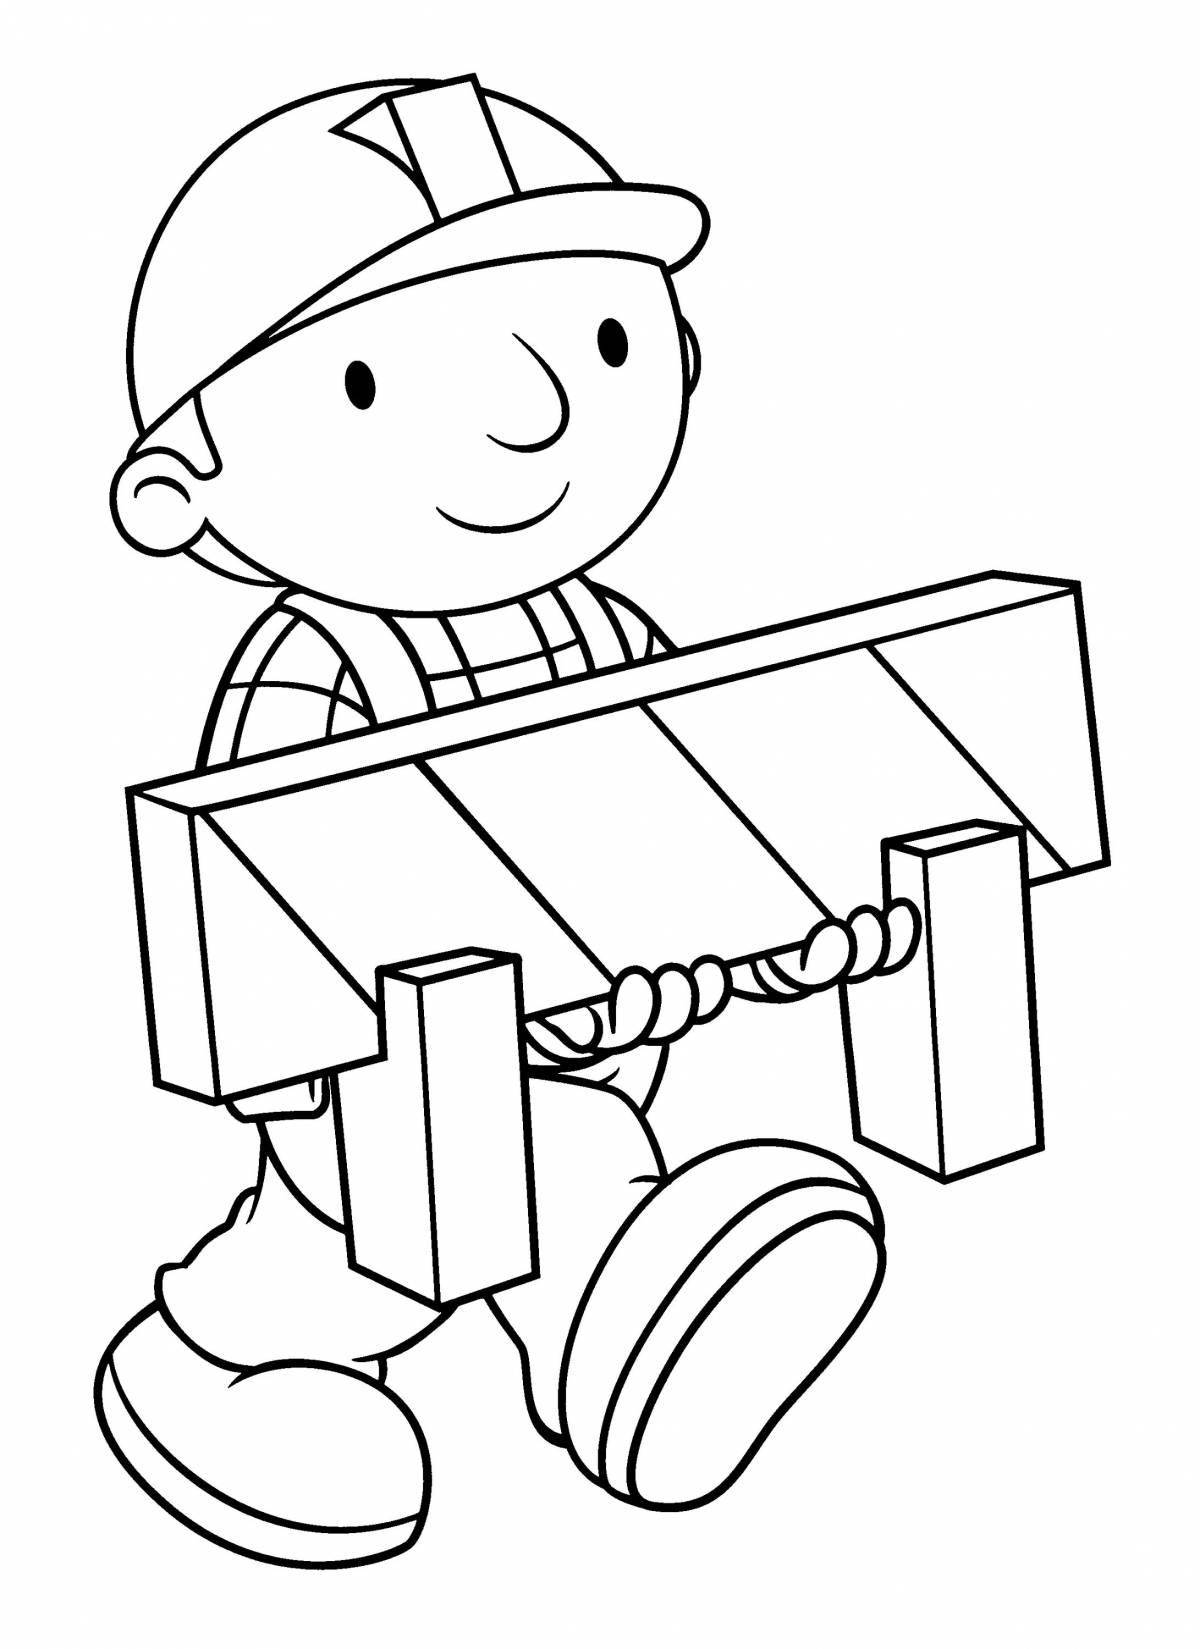 Coloring interesting construction professions